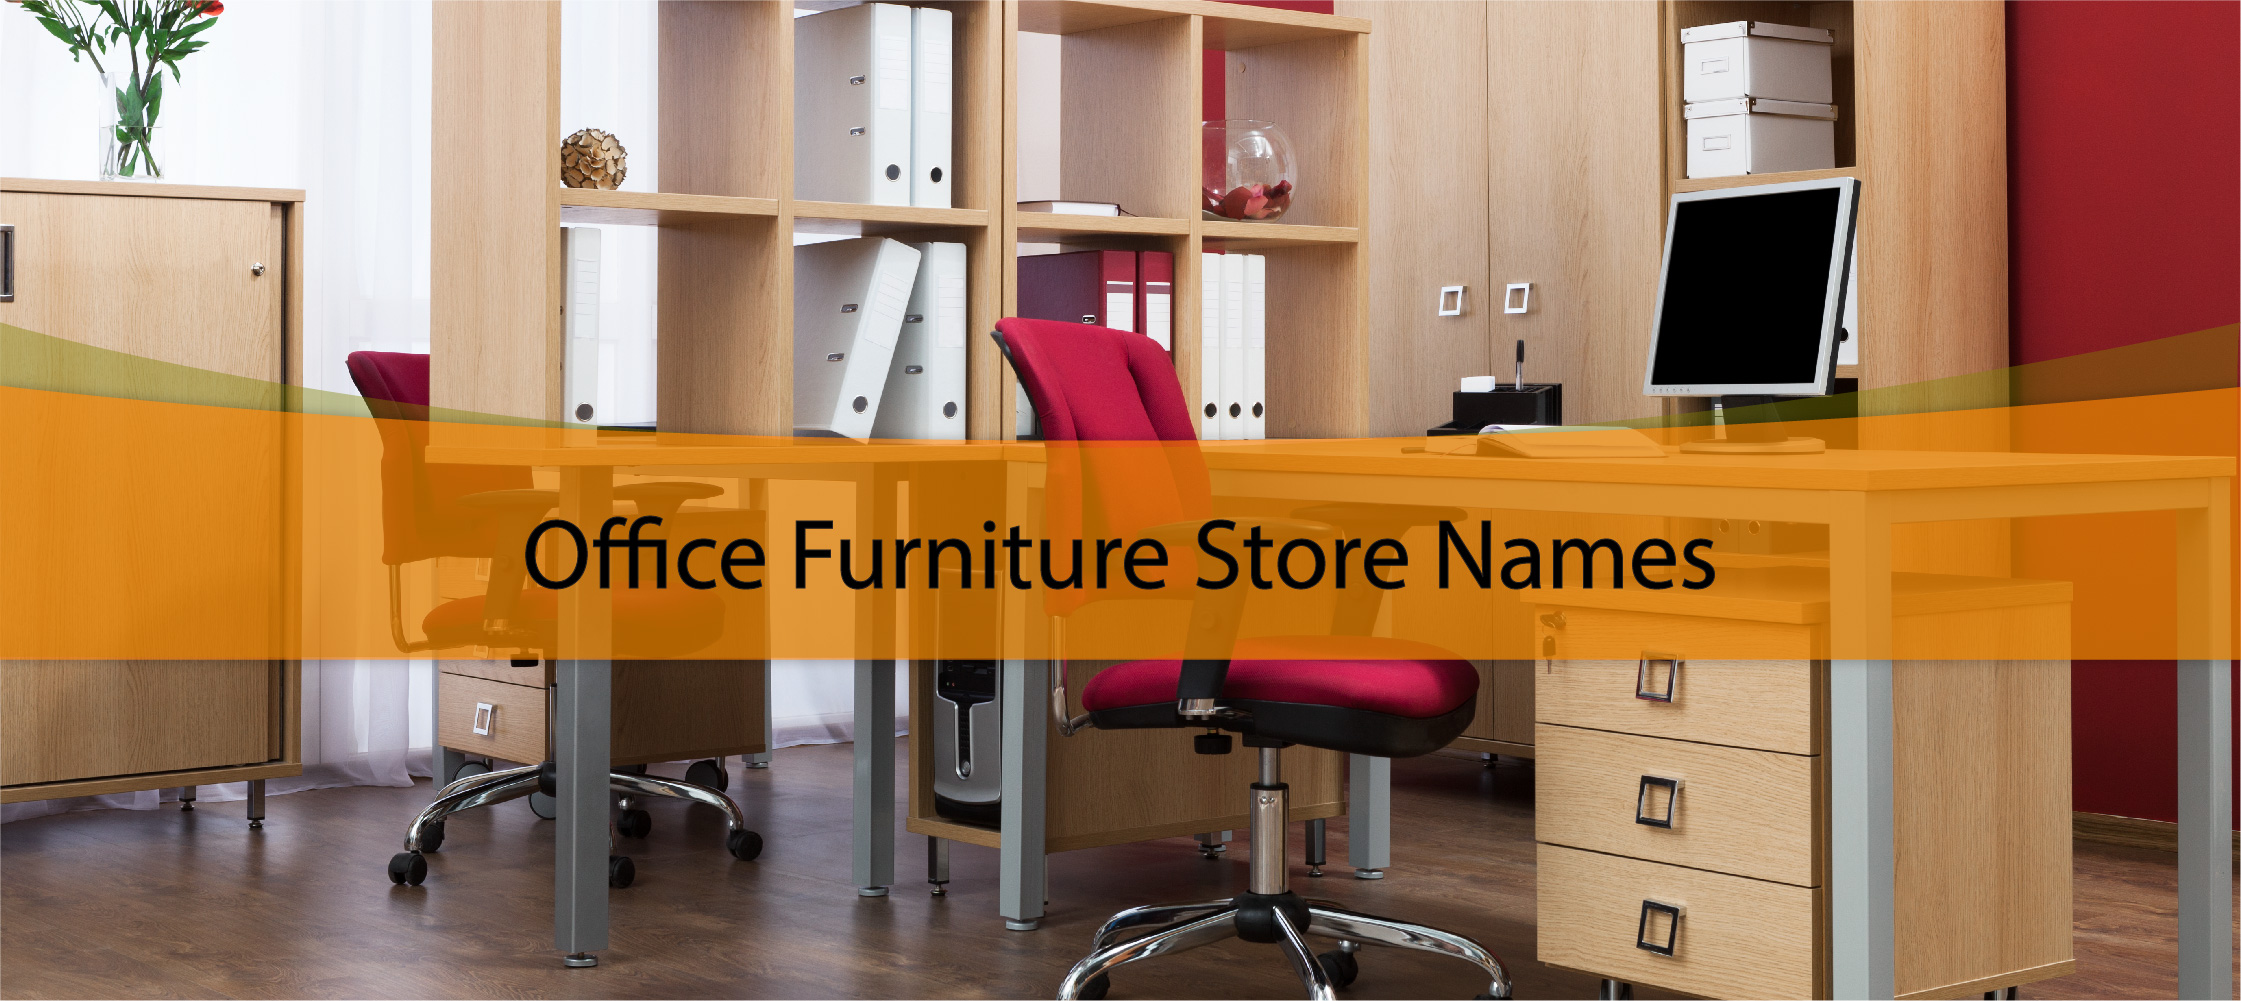 Office Furniture Store Names